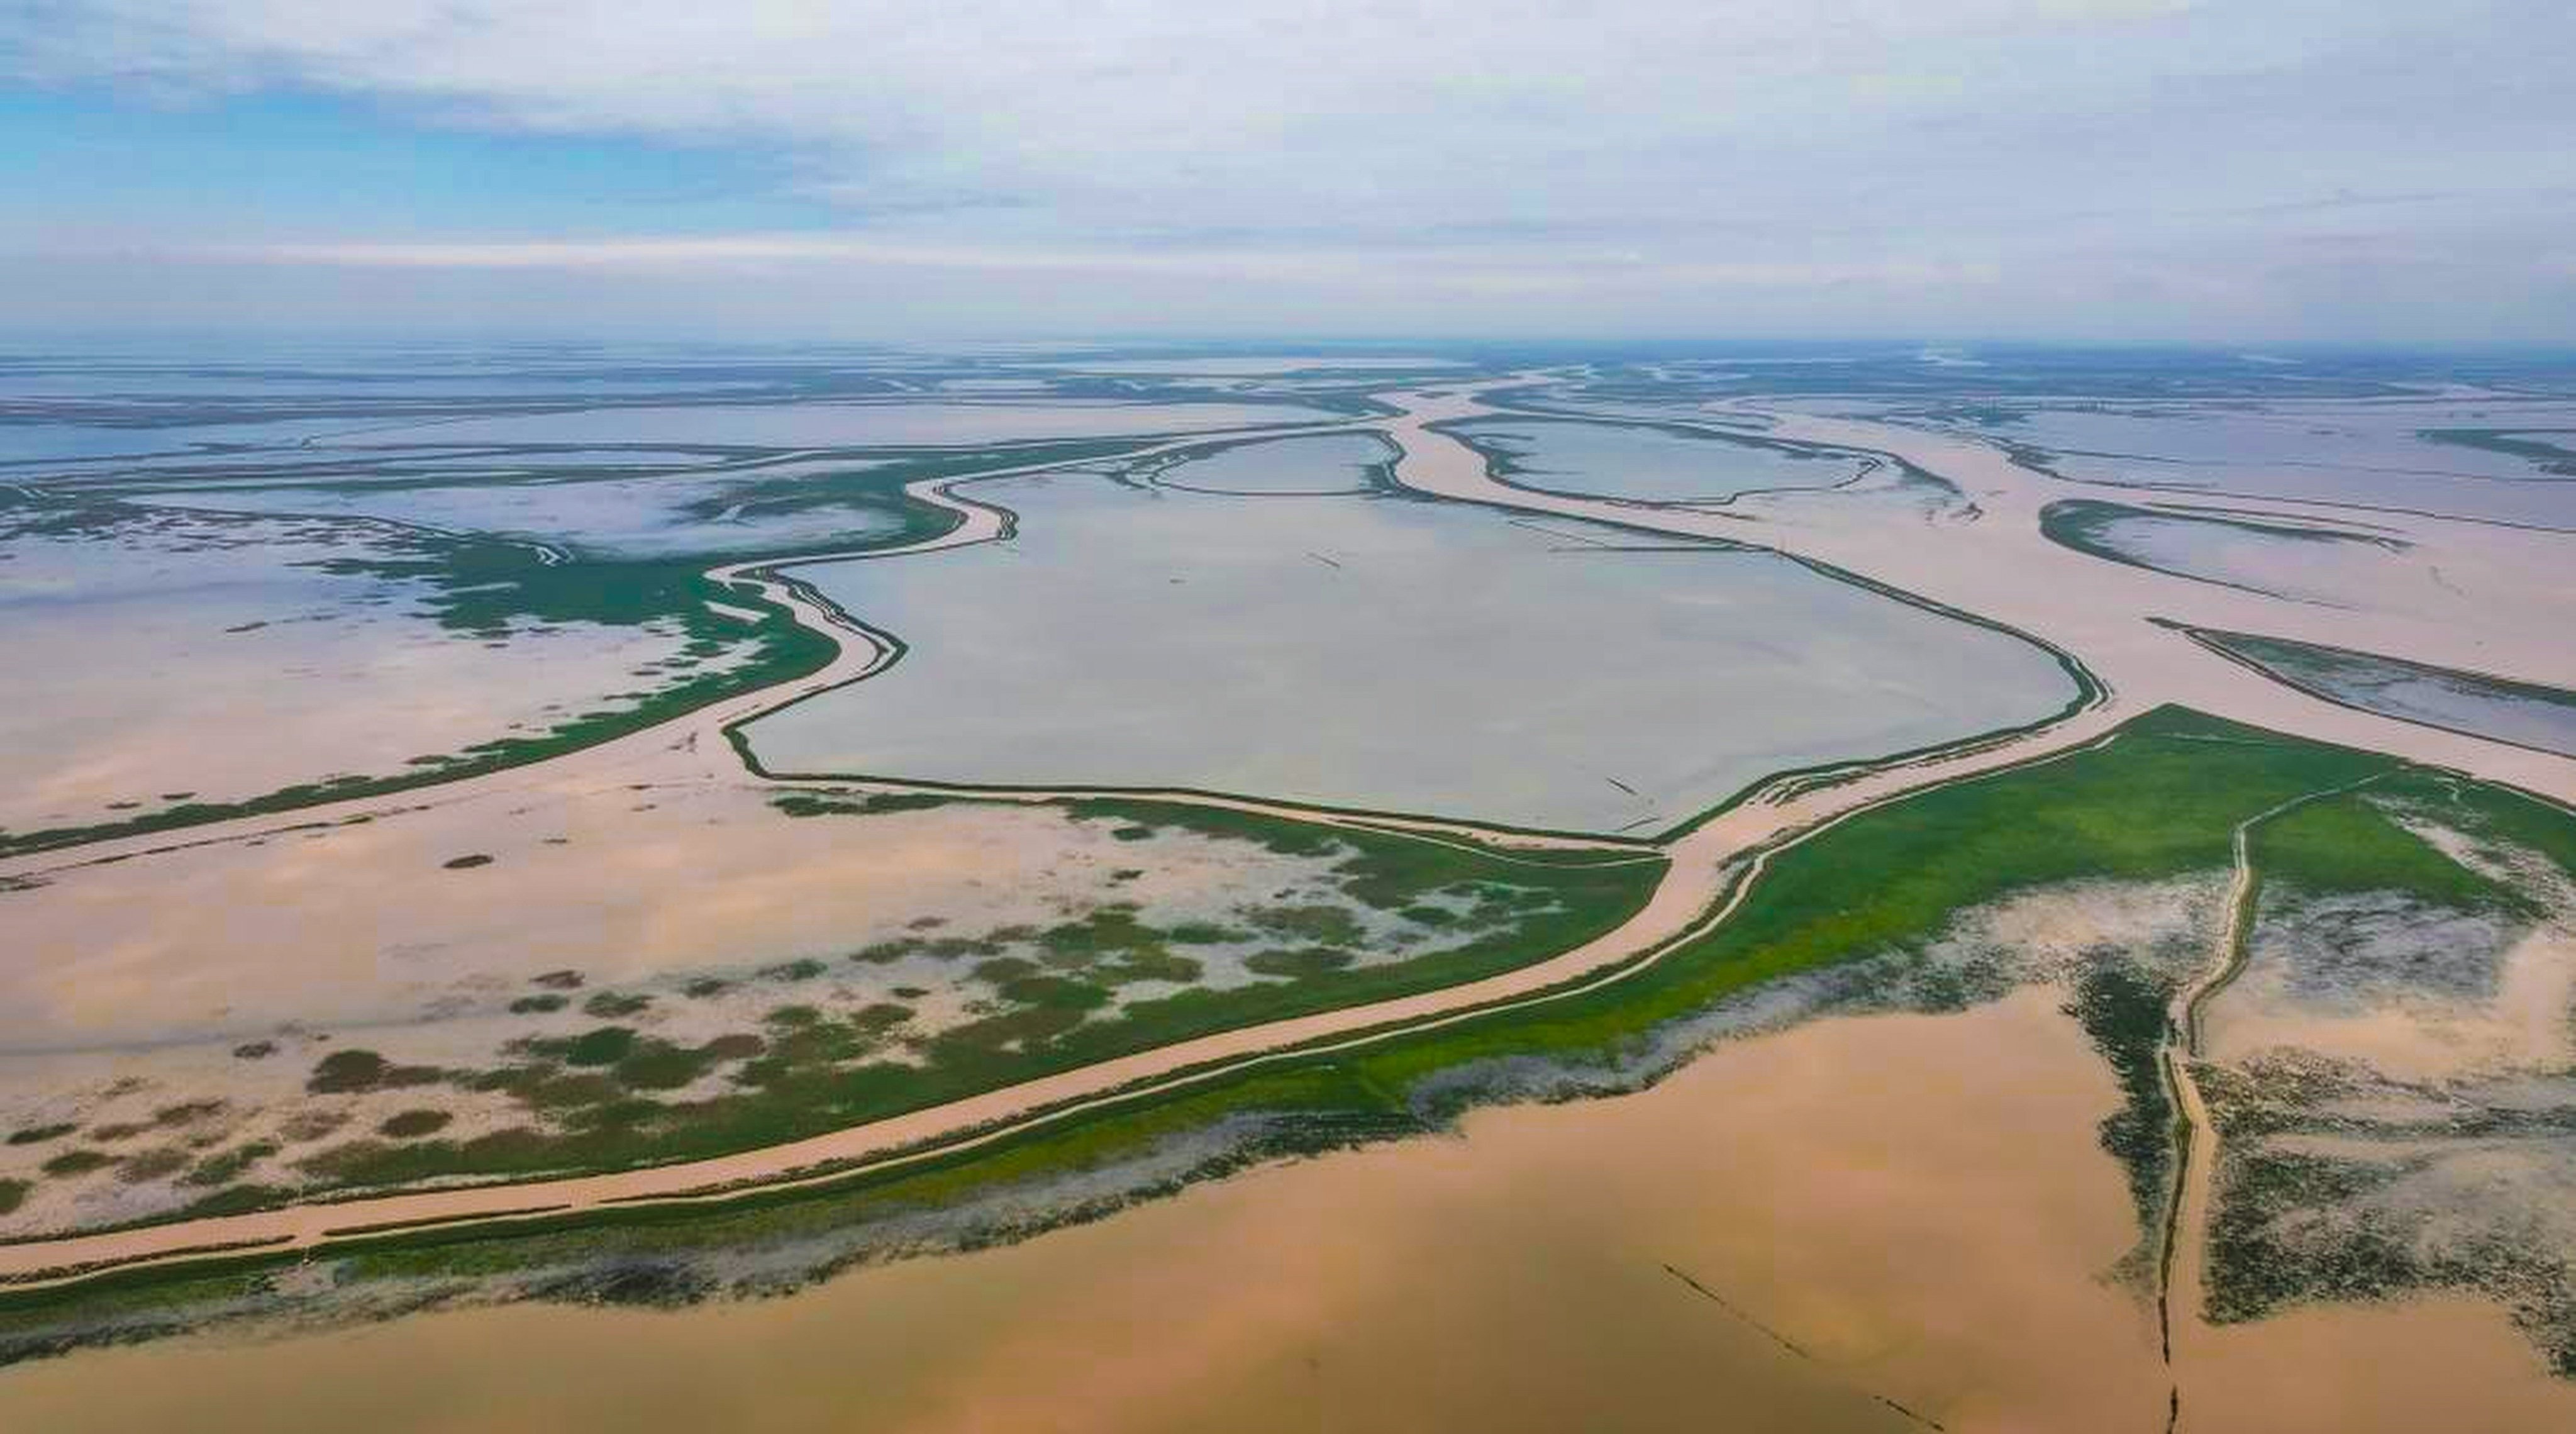 Issues flagged in a central ecological and environmental inspection report include wide swathes of illegal lowland enclosures in the Poyang Lake area. Photo: Handout 